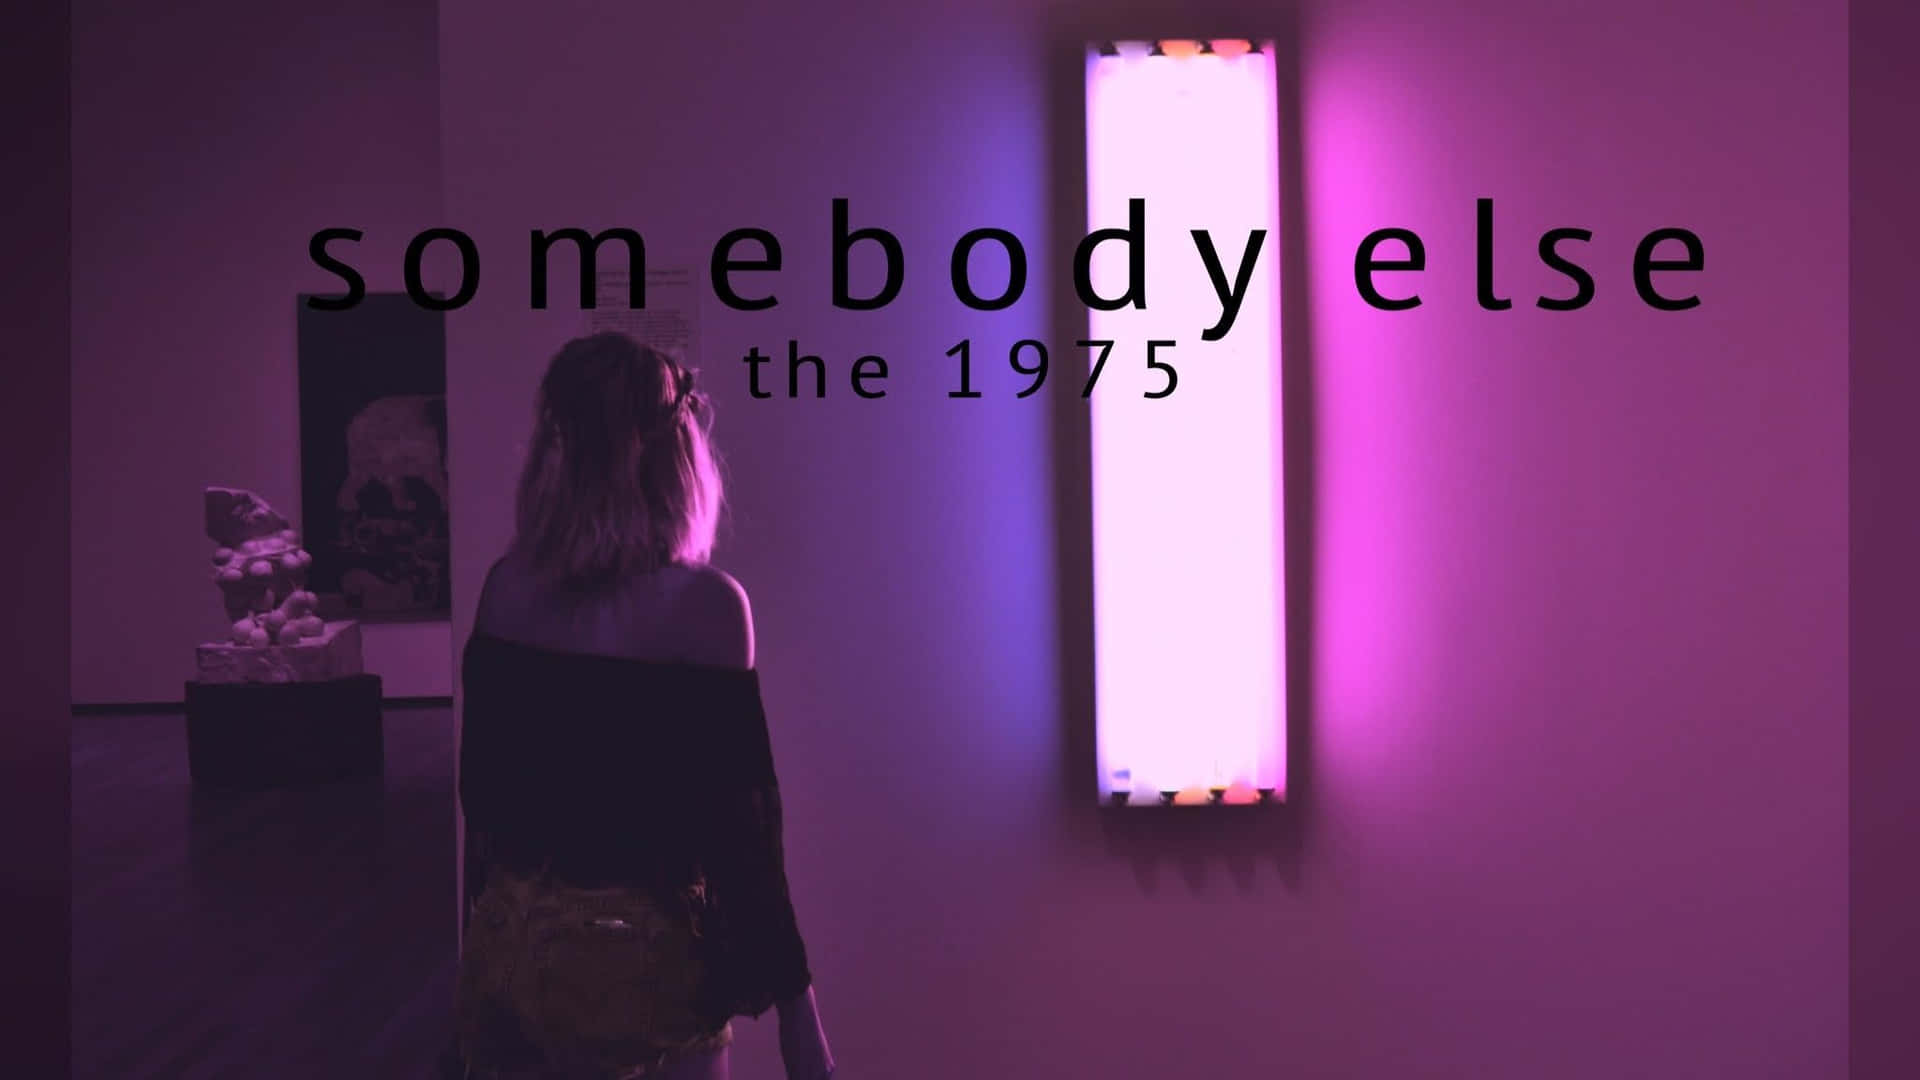 2048x1152 Aesthetic Pink Somebody Else The 1975 Wallpaper